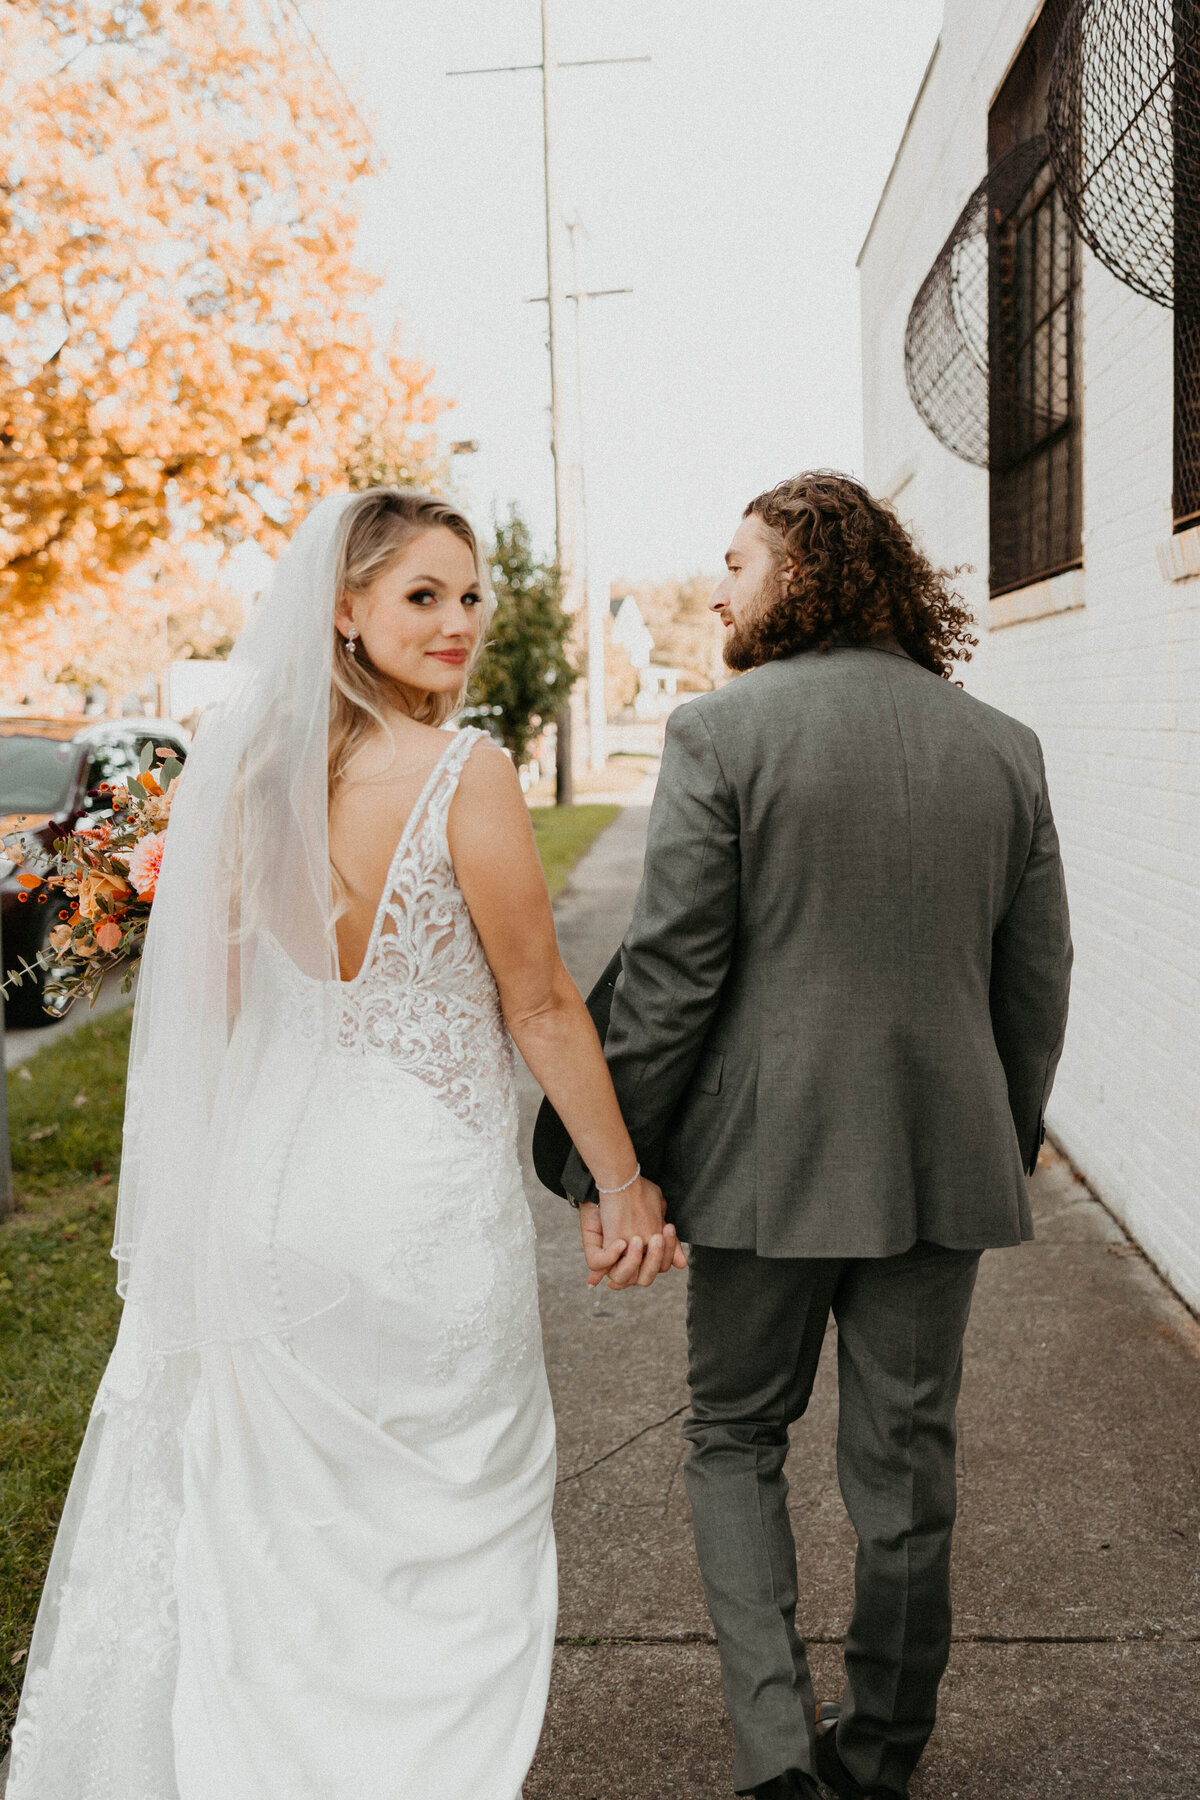 Bride looking over shoulder at camera holding grooms hand